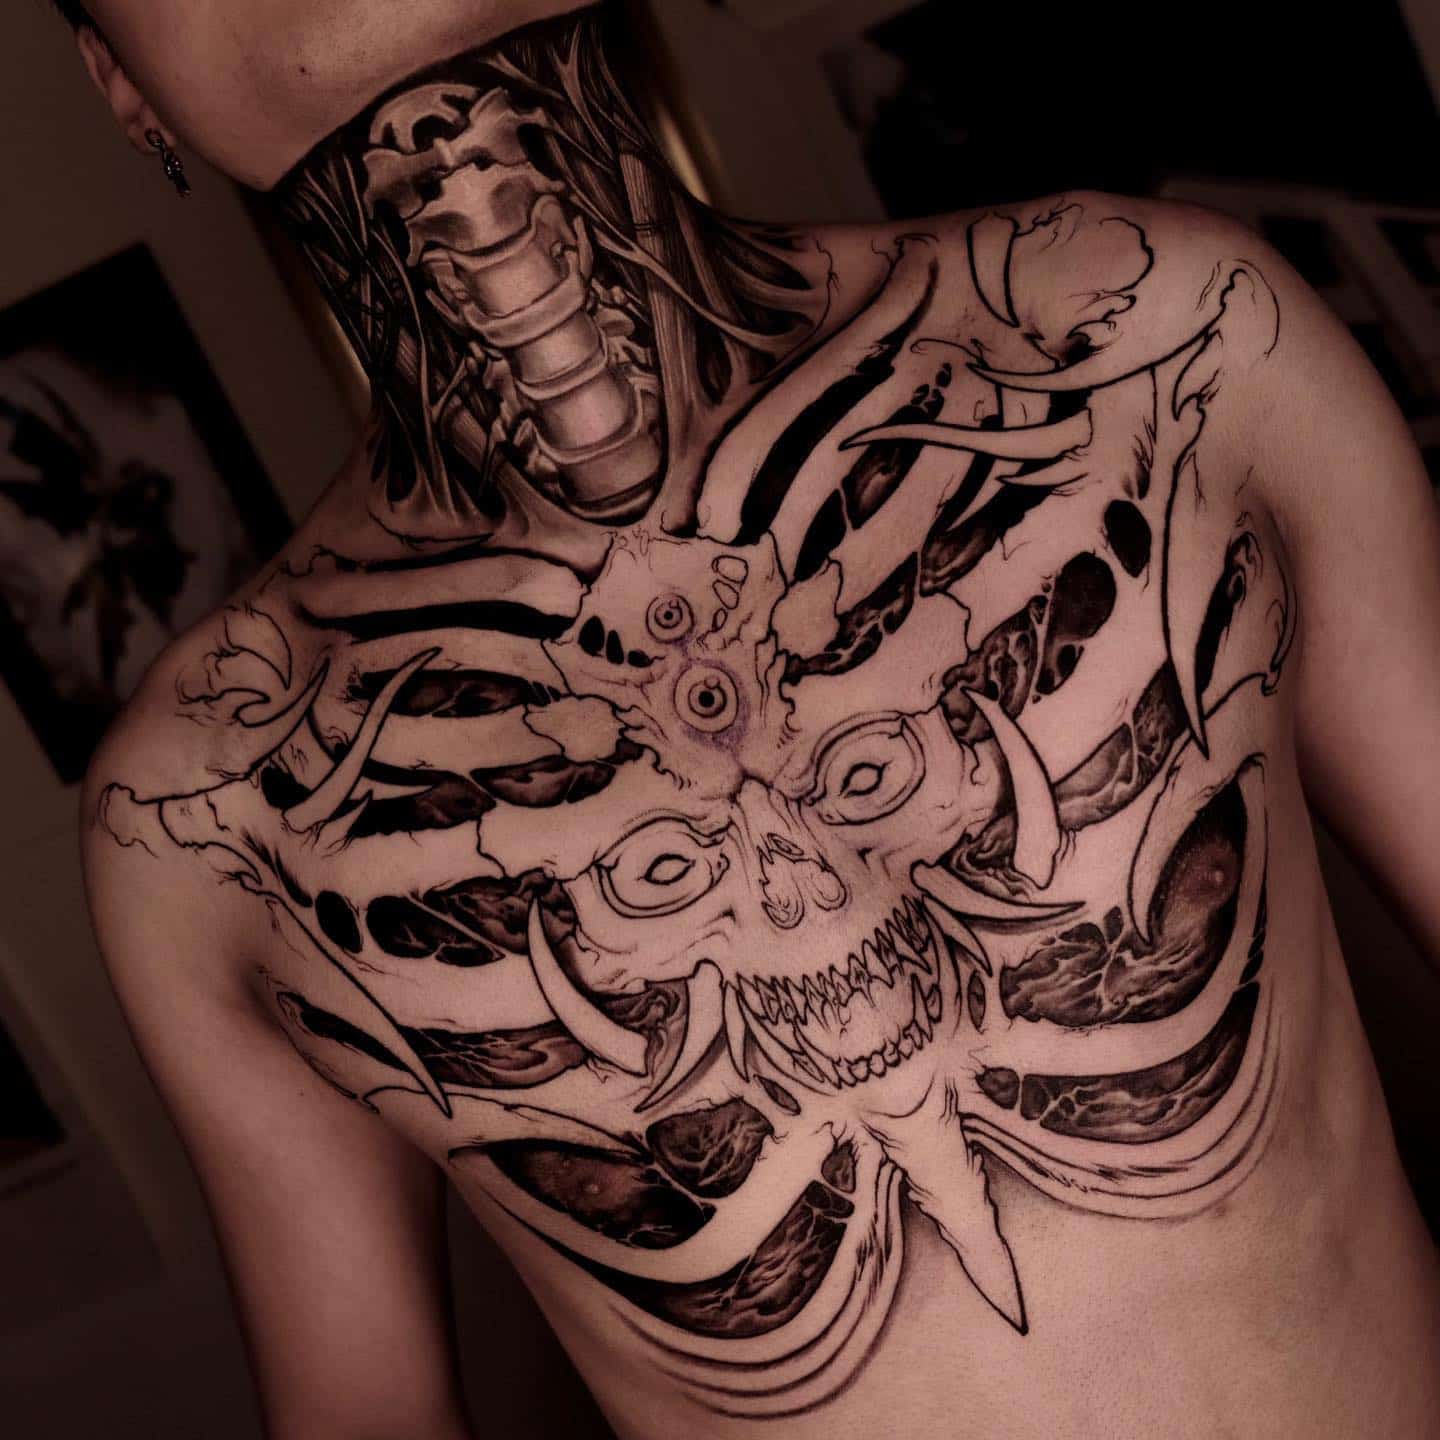 Chest tattoo by blk seon